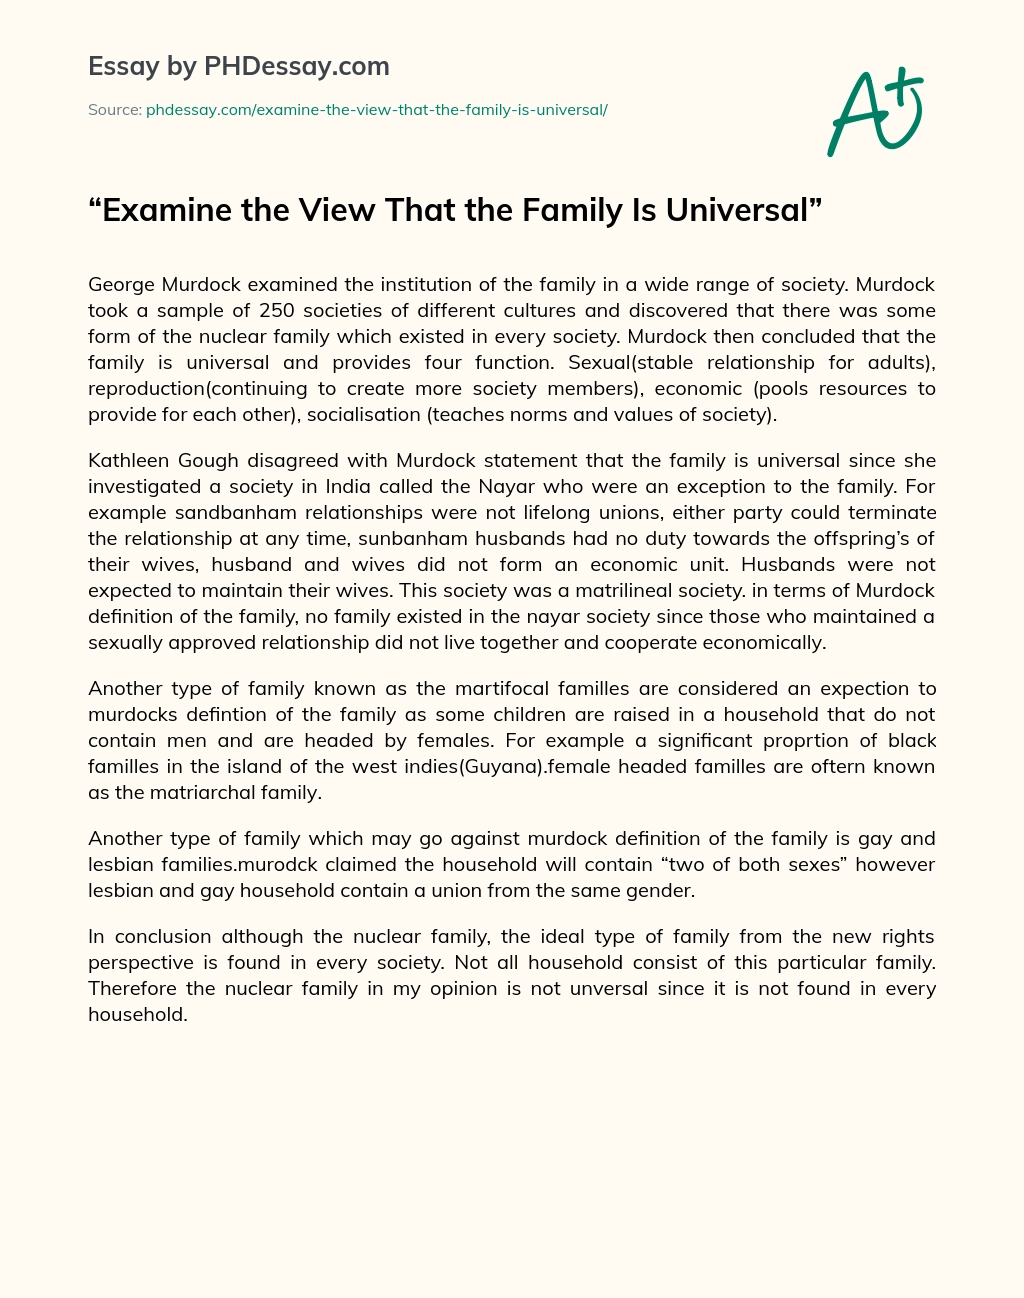 Examine the View That the Family Is Universal essay